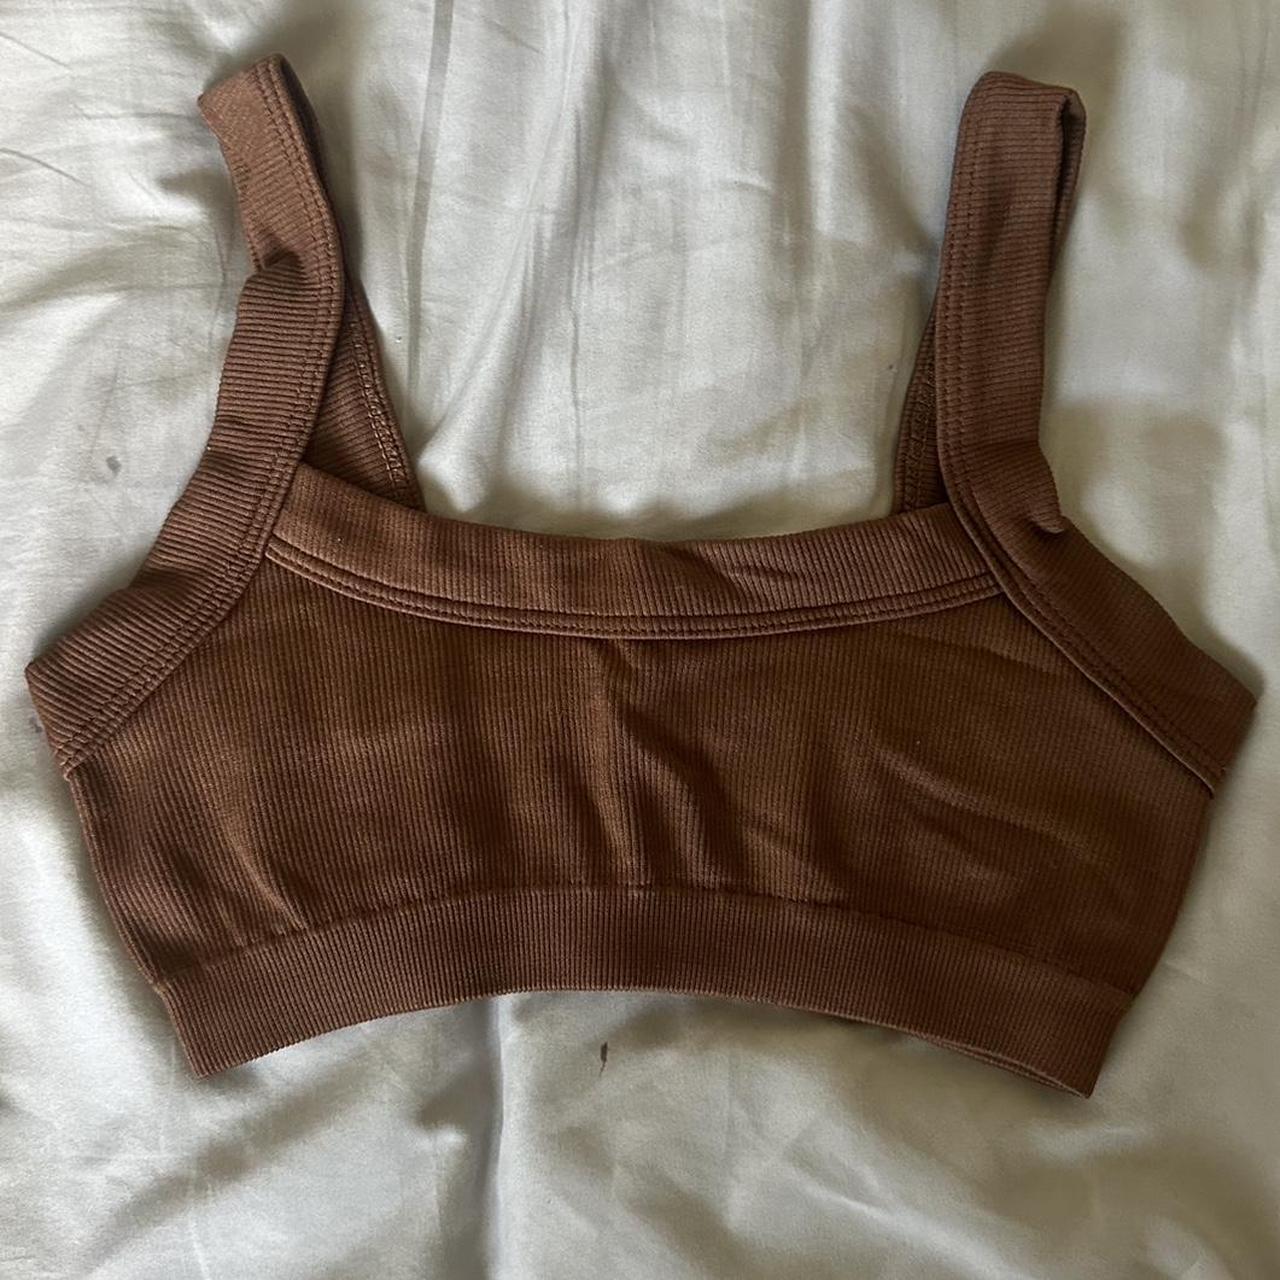 Lucky brand teal sports bra / bralette with blue and - Depop